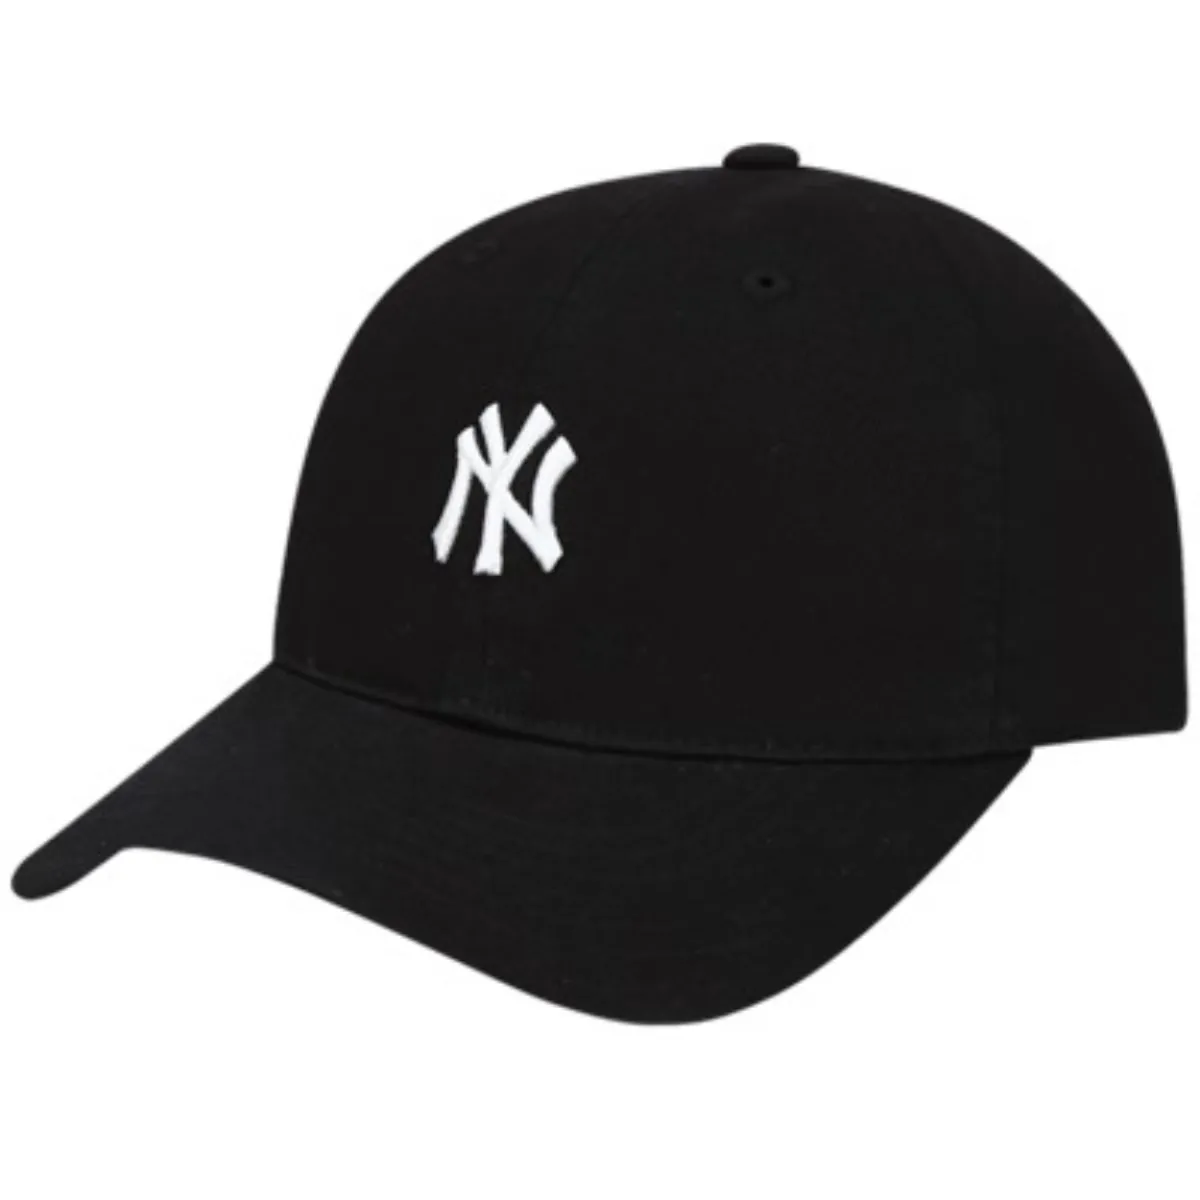 59 FIFTY by New Era presents the Small Logo Hat